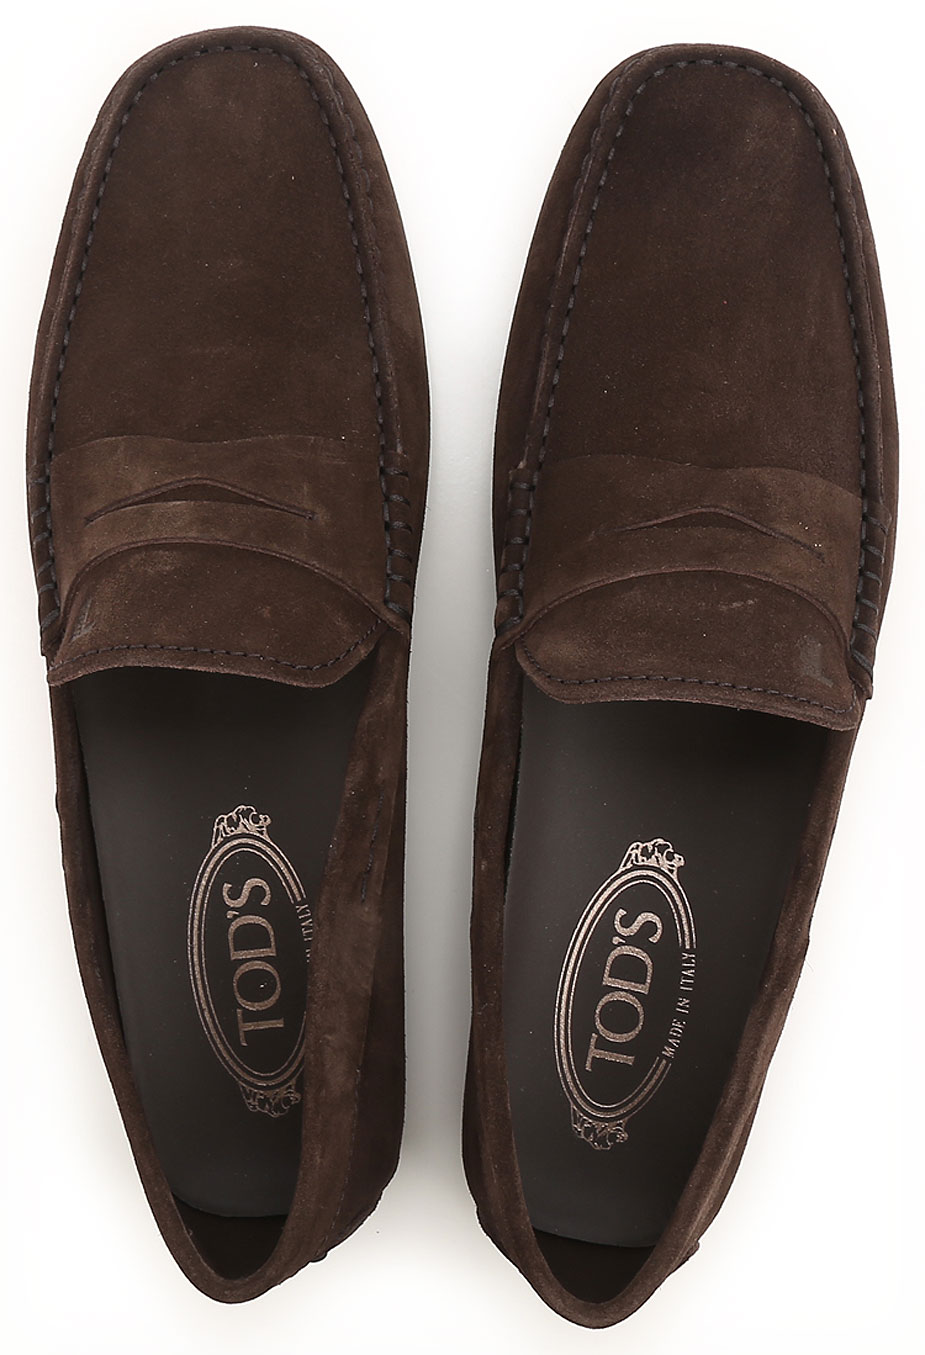 Mens Shoes Tods, Style code: xxm0lr00011re0s800--